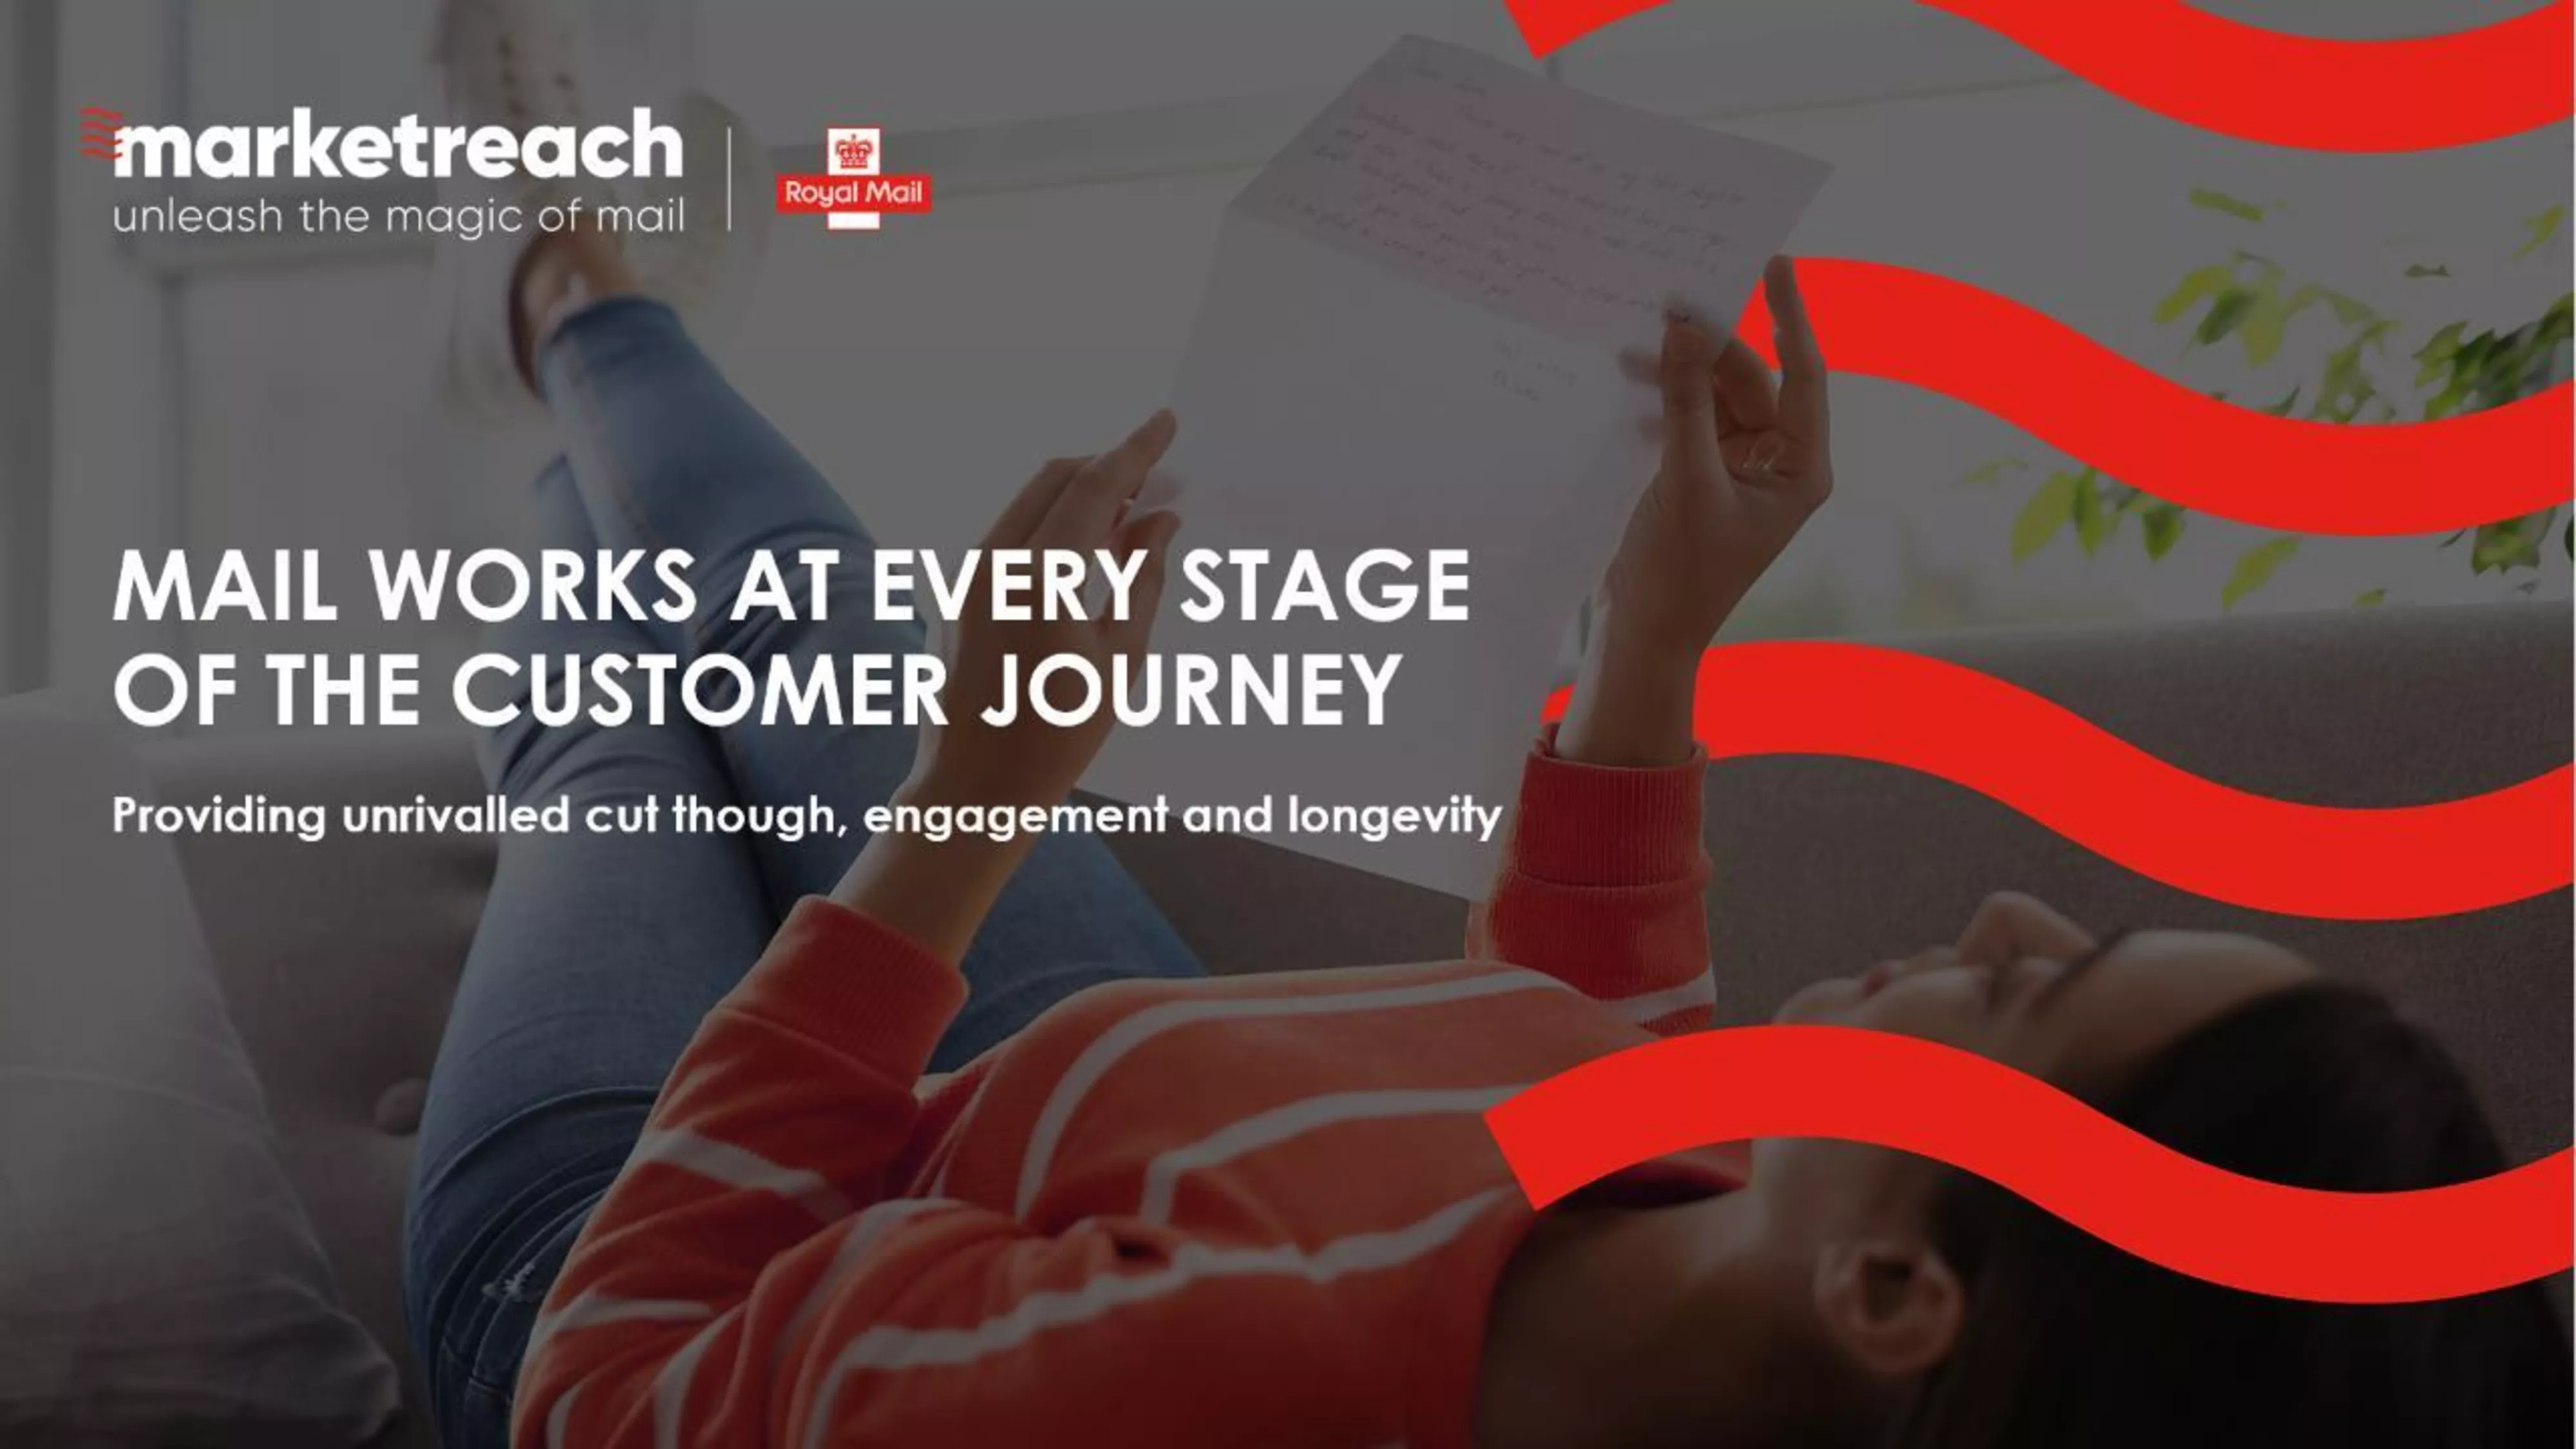 Mail works at every part of the customer journey